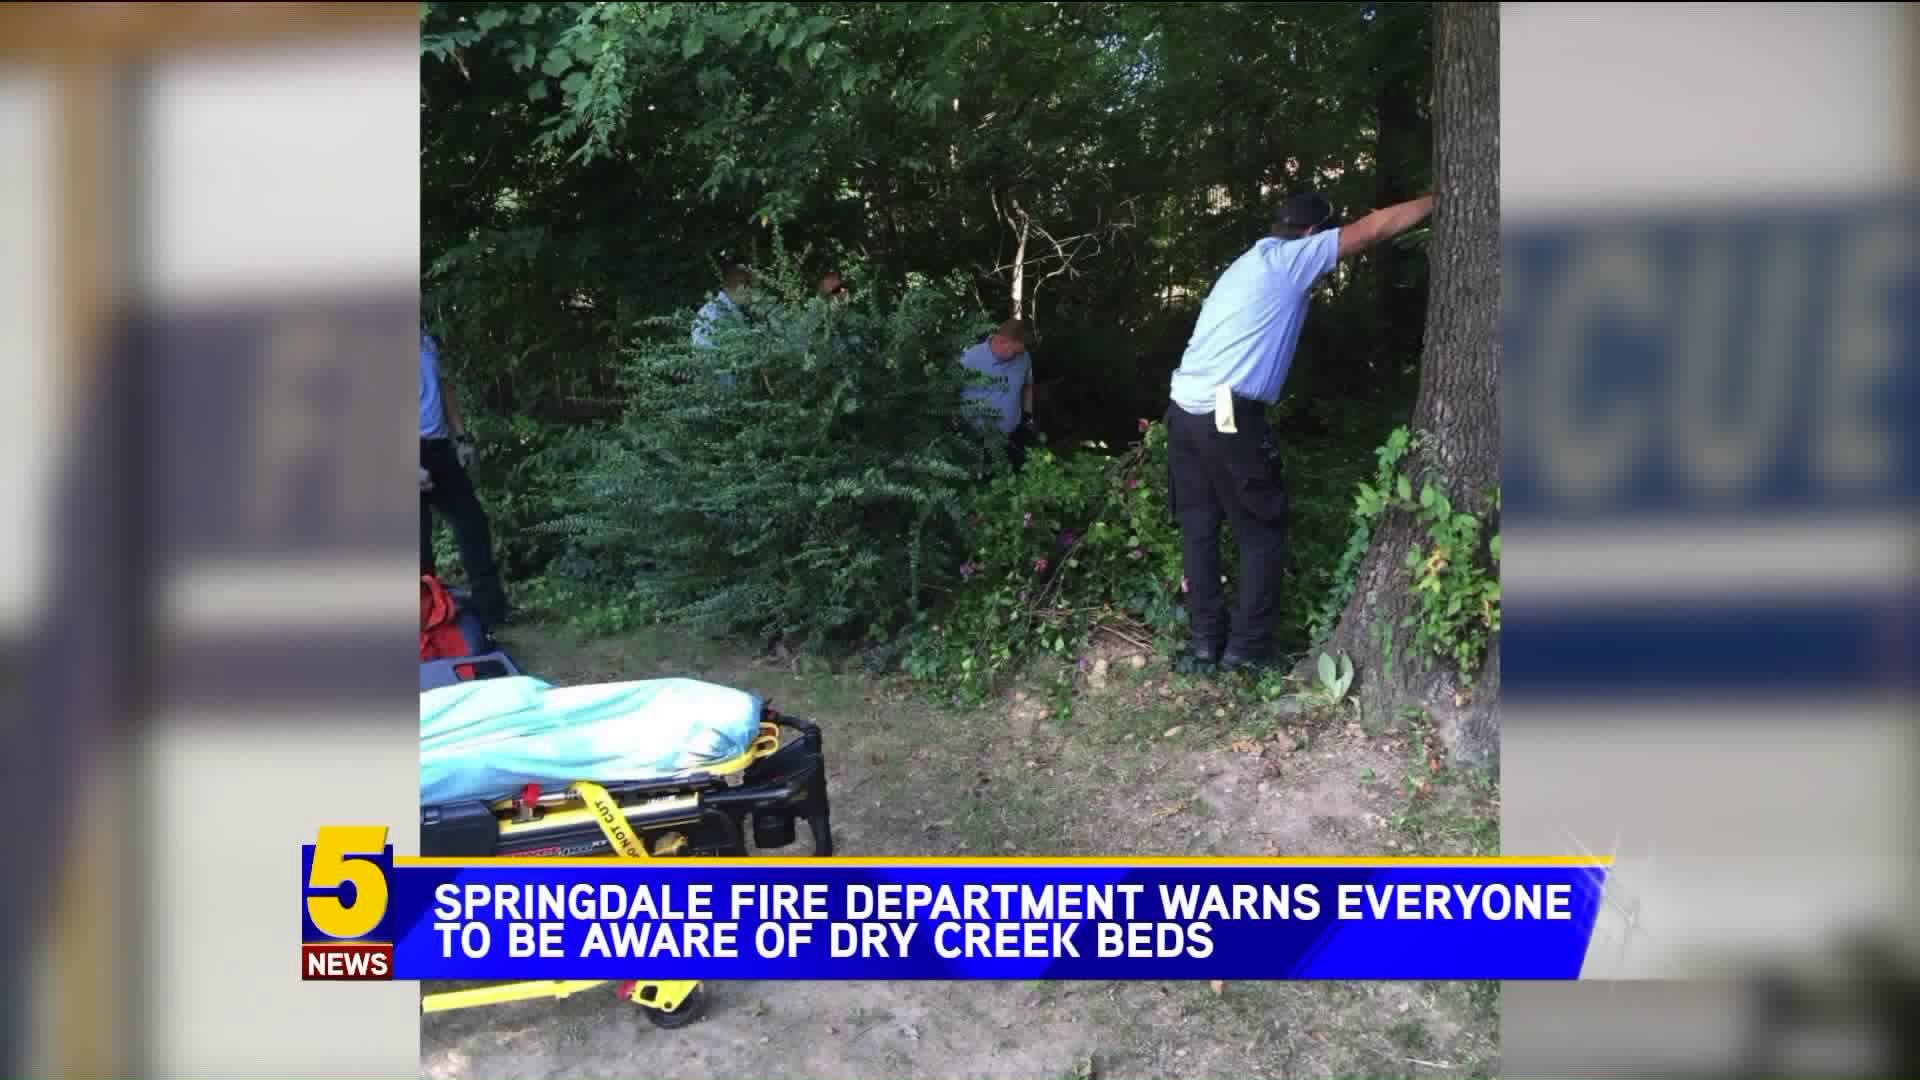 Springdale Fire Department Warns Everyone To Be aWare Of Dry Creek Beds